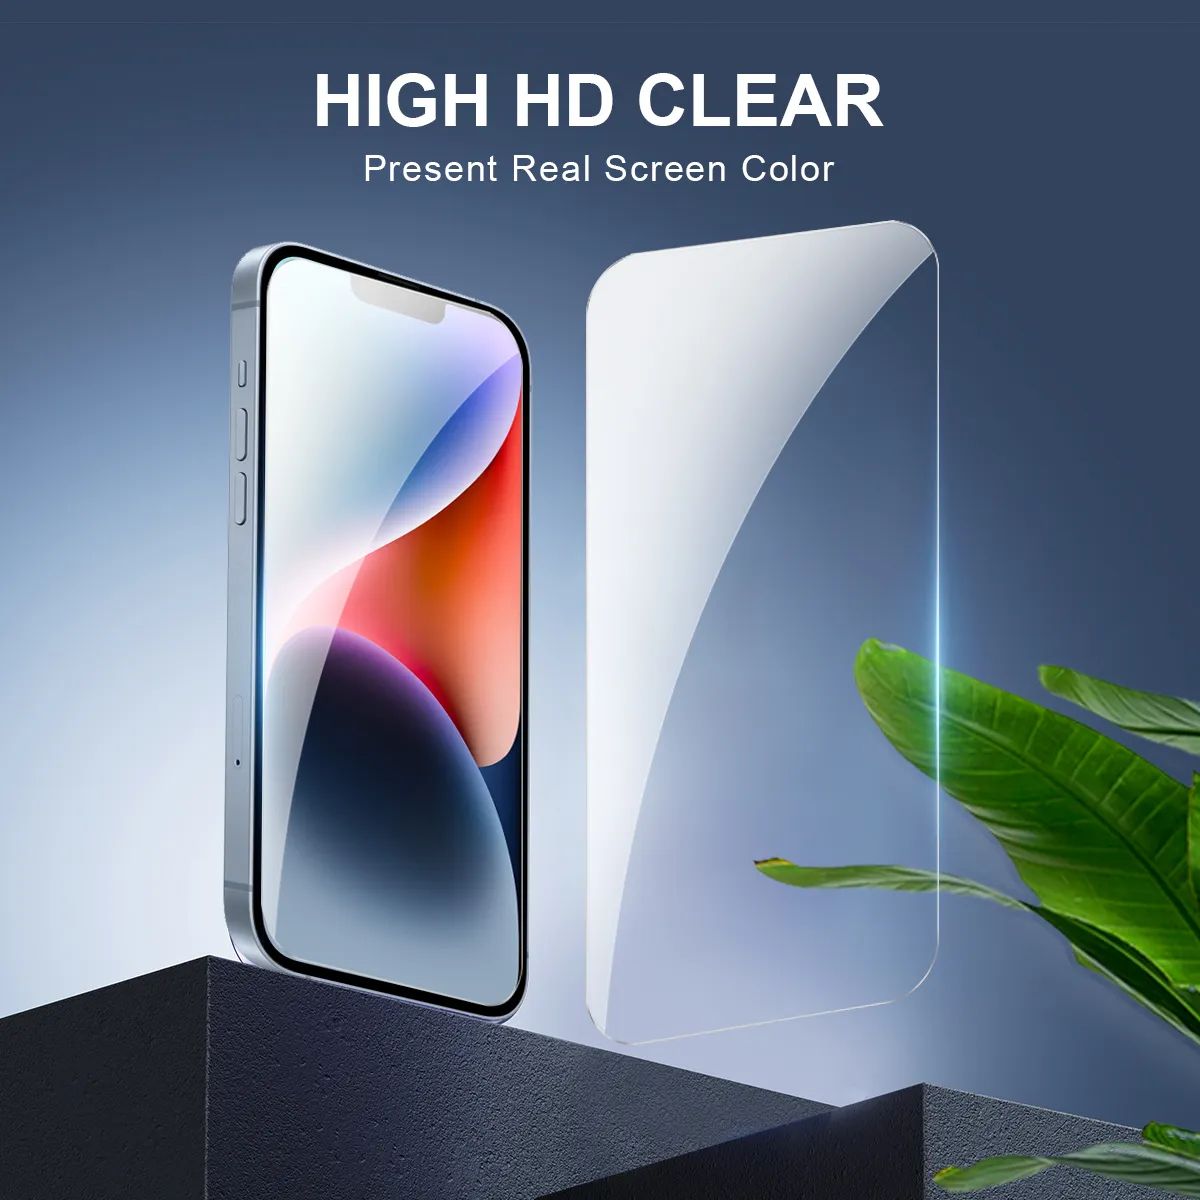 High Quality Market Tempered Film 15 14 13 12 11 Pro Max XS XR Tempered Glass for Iphone 7 8 Plus LG Stylo 6 Toughened Film 0.33mm Screen Protector with Retail